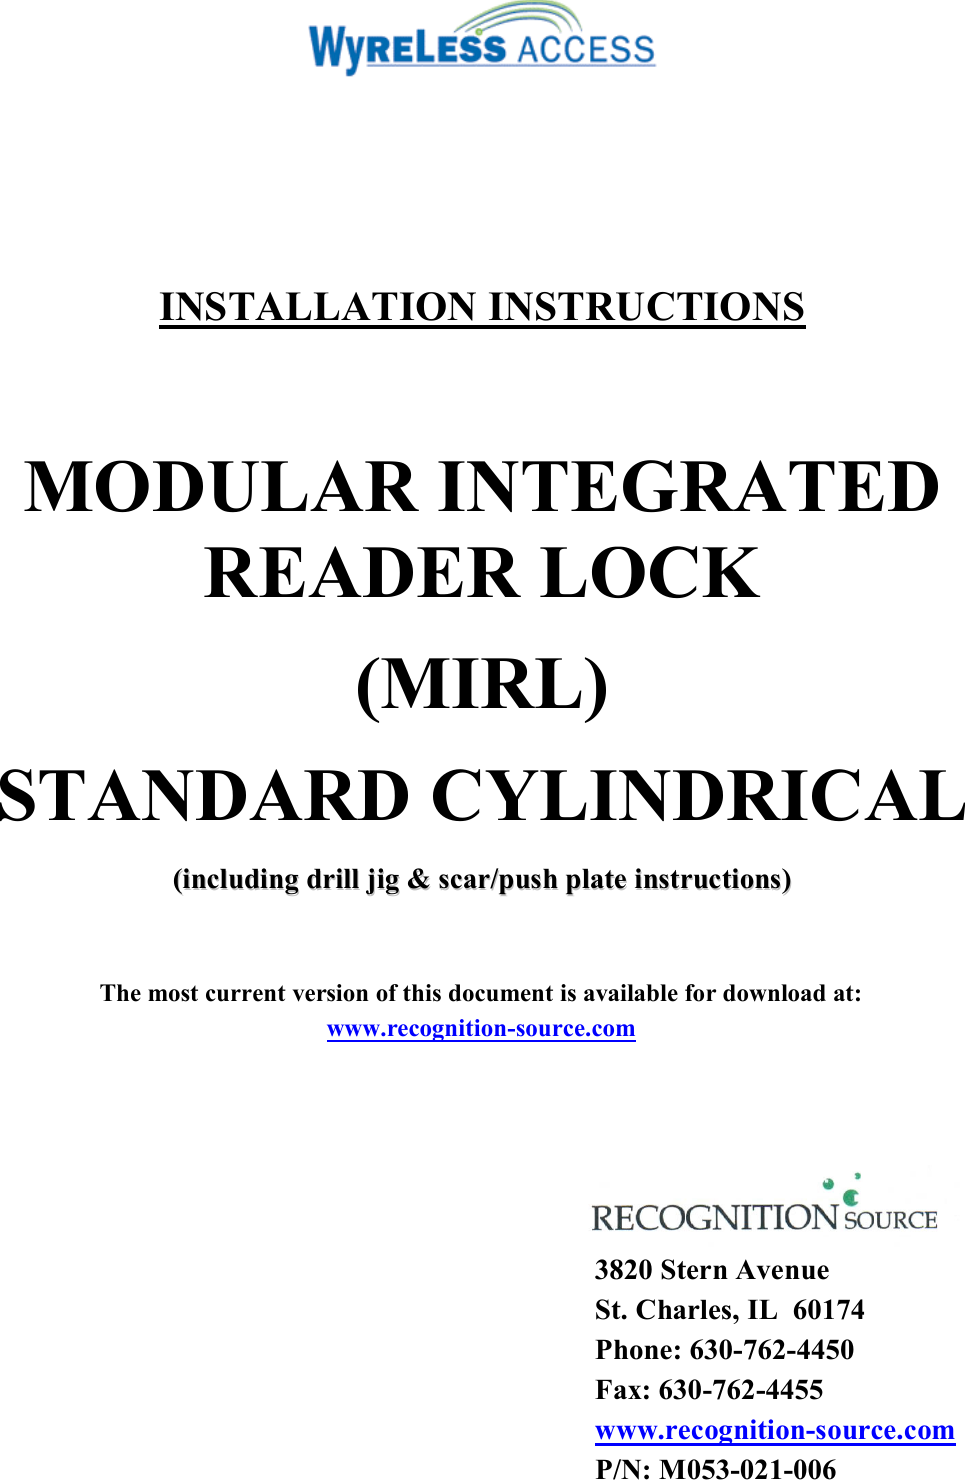         INSTALLATION INSTRUCTIONS  MODULAR INTEGRATED READER LOCK (MIRL) STANDARD CYLINDRICAL ((iinncclluuddiinngg  ddrriillll  jjiigg  &amp;&amp;  ssccaarr//ppuusshh  ppllaattee  iinnssttrruuccttiioonnss))    The most current version of this document is available for download at: www.recognition-source.com      3820 Stern Avenue St. Charles, IL  60174 Phone: 630-762-4450 Fax: 630-762-4455 www.recognition-source.com P/N: M053-021-006